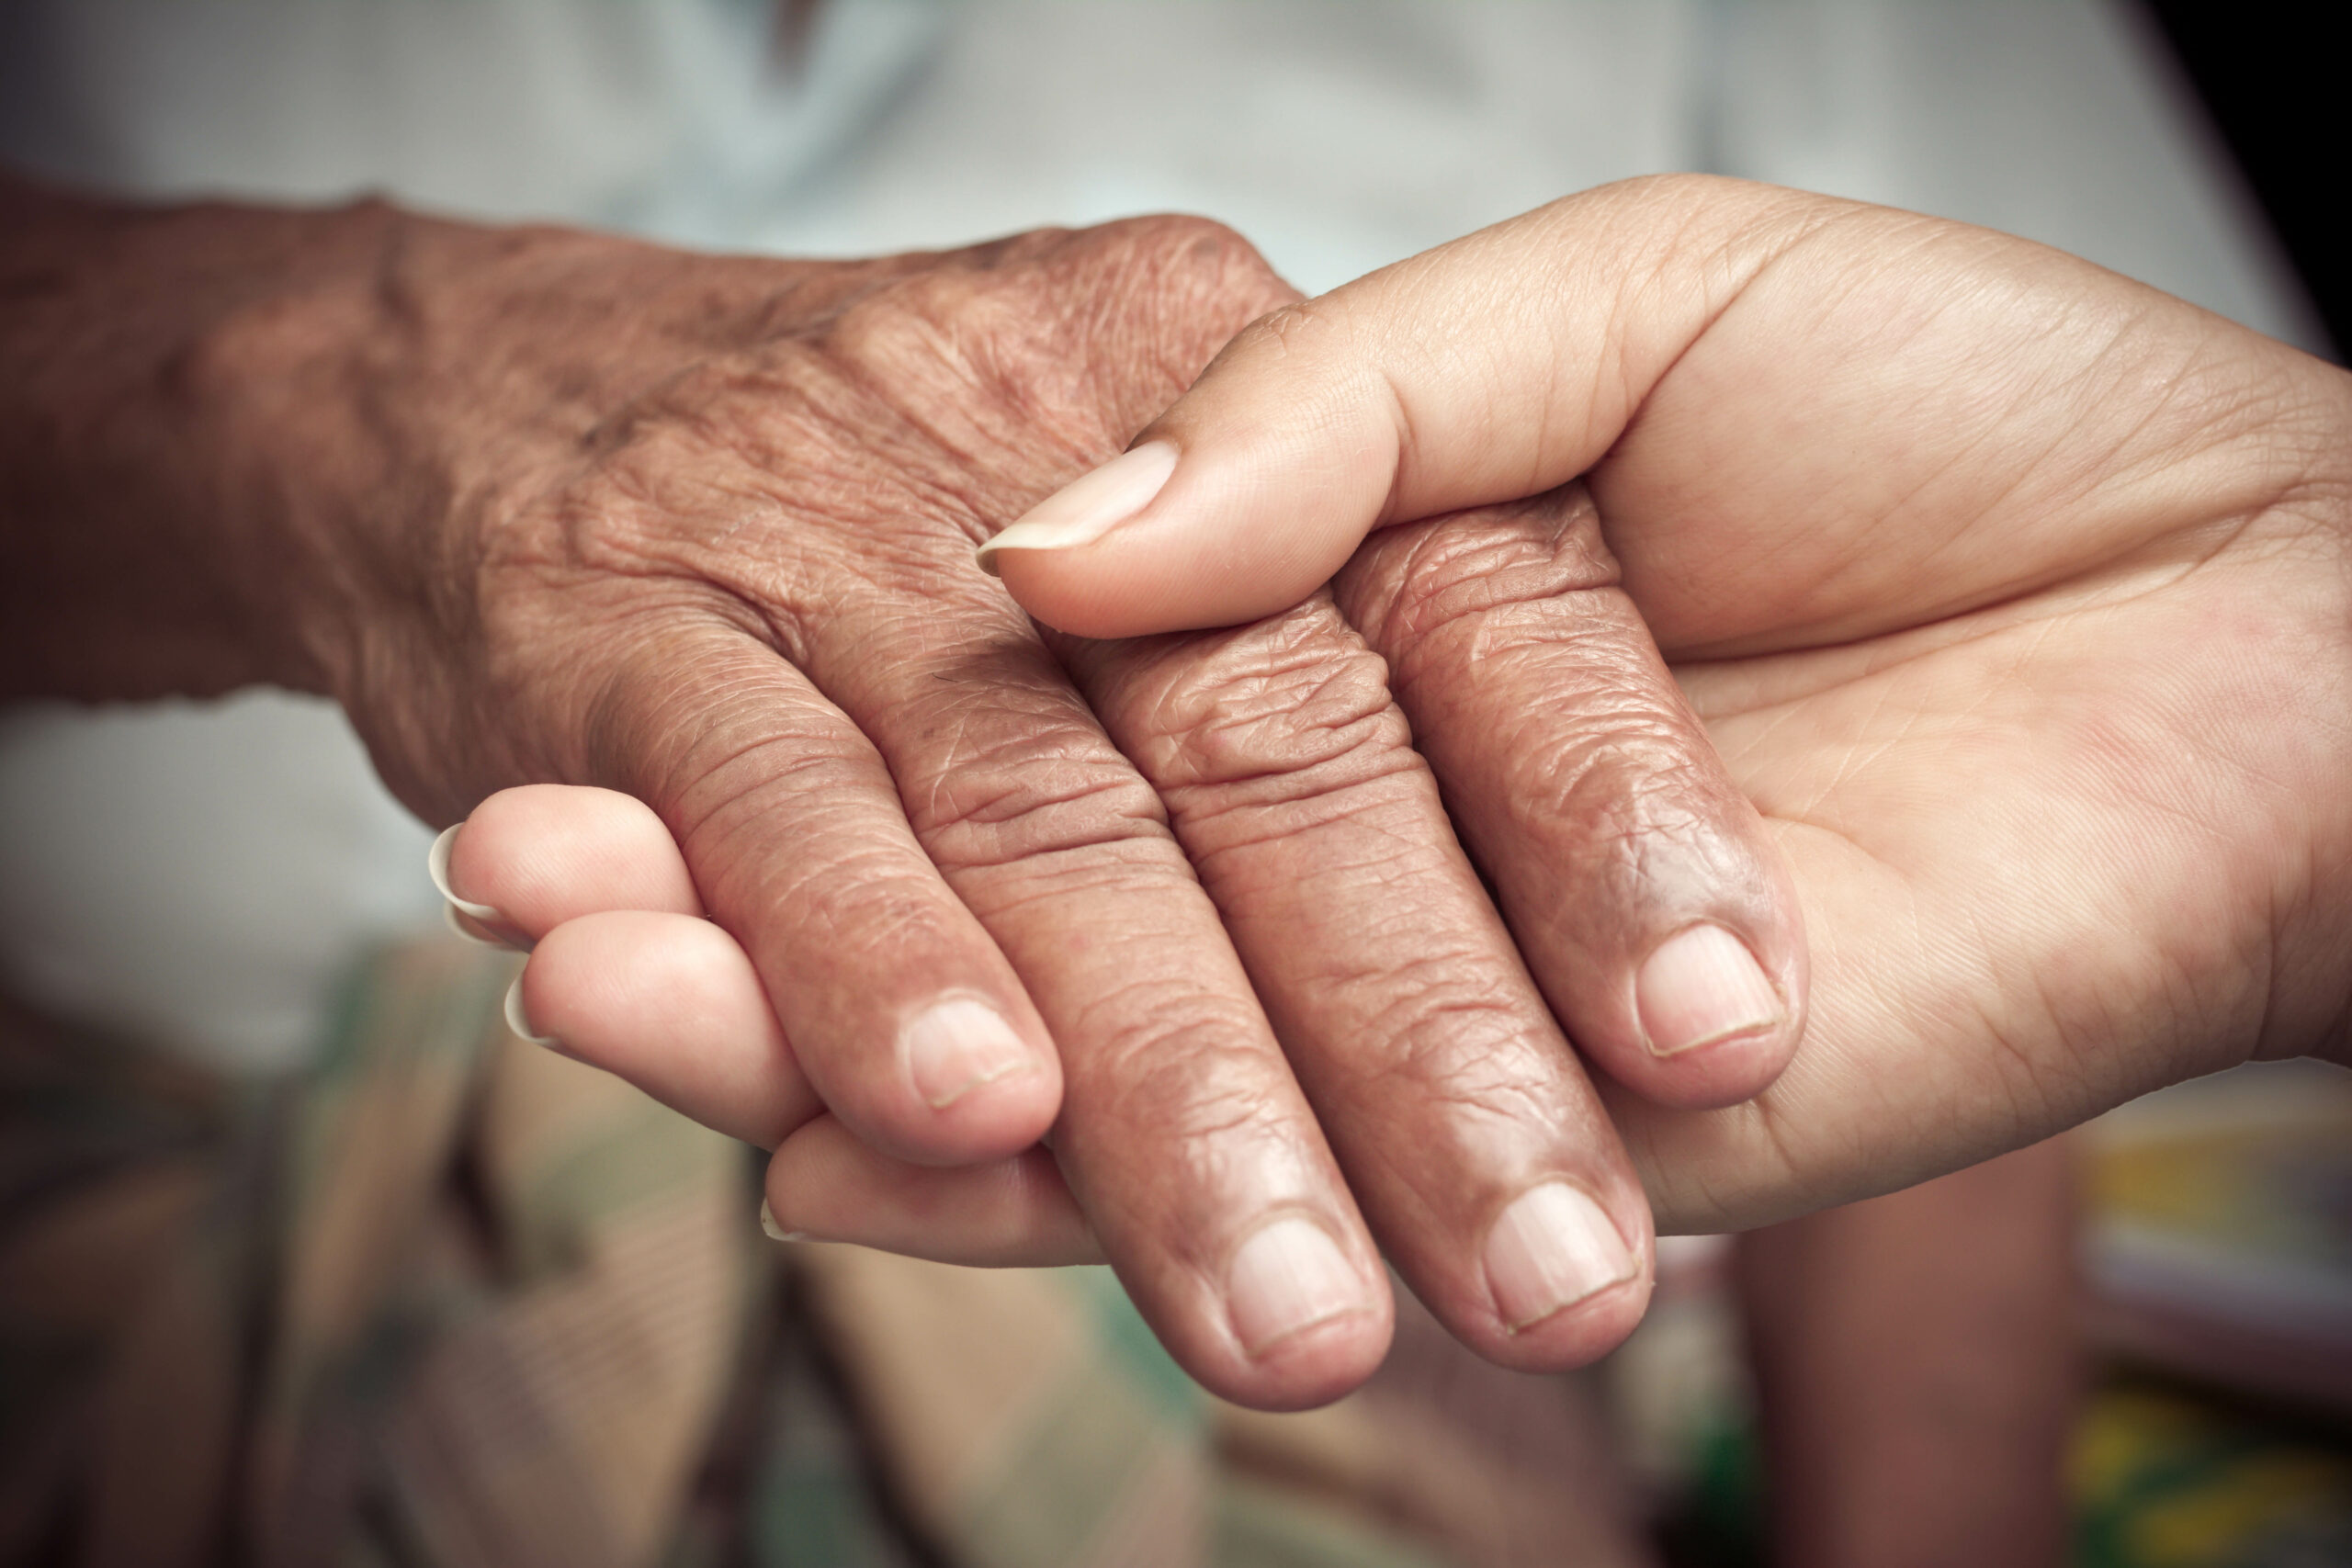 Elderly Fall prevention- Senior and young holding hands